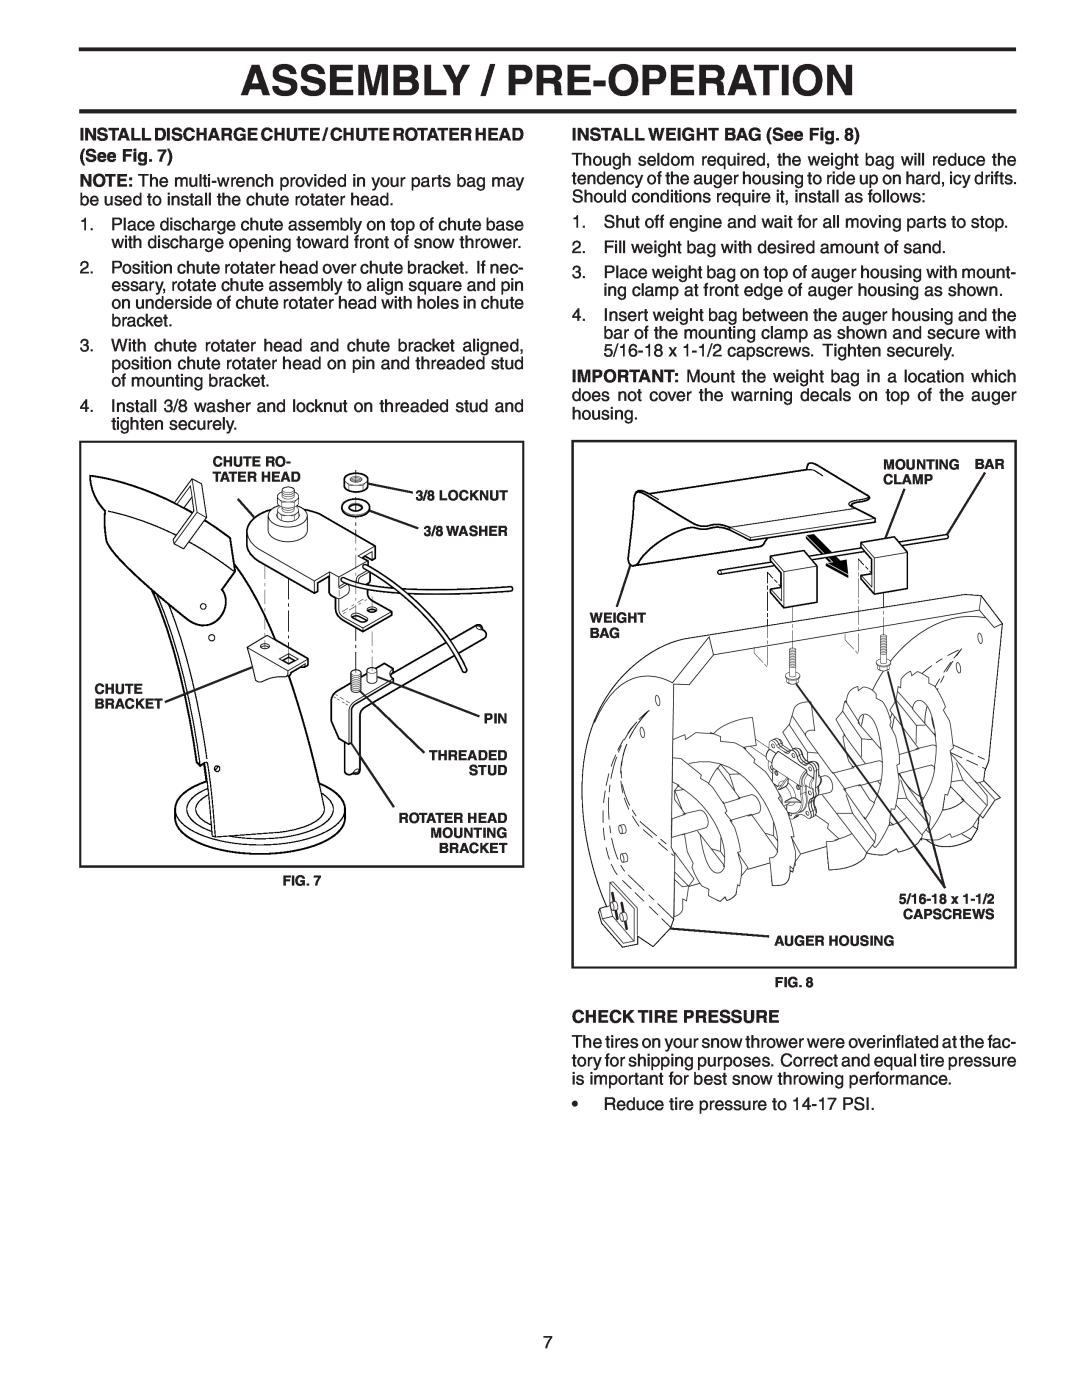 Poulan PP5524ESA owner manual Assembly / Pre-Operation, INSTALL WEIGHT BAG See Fig, Check Tire Pressure 